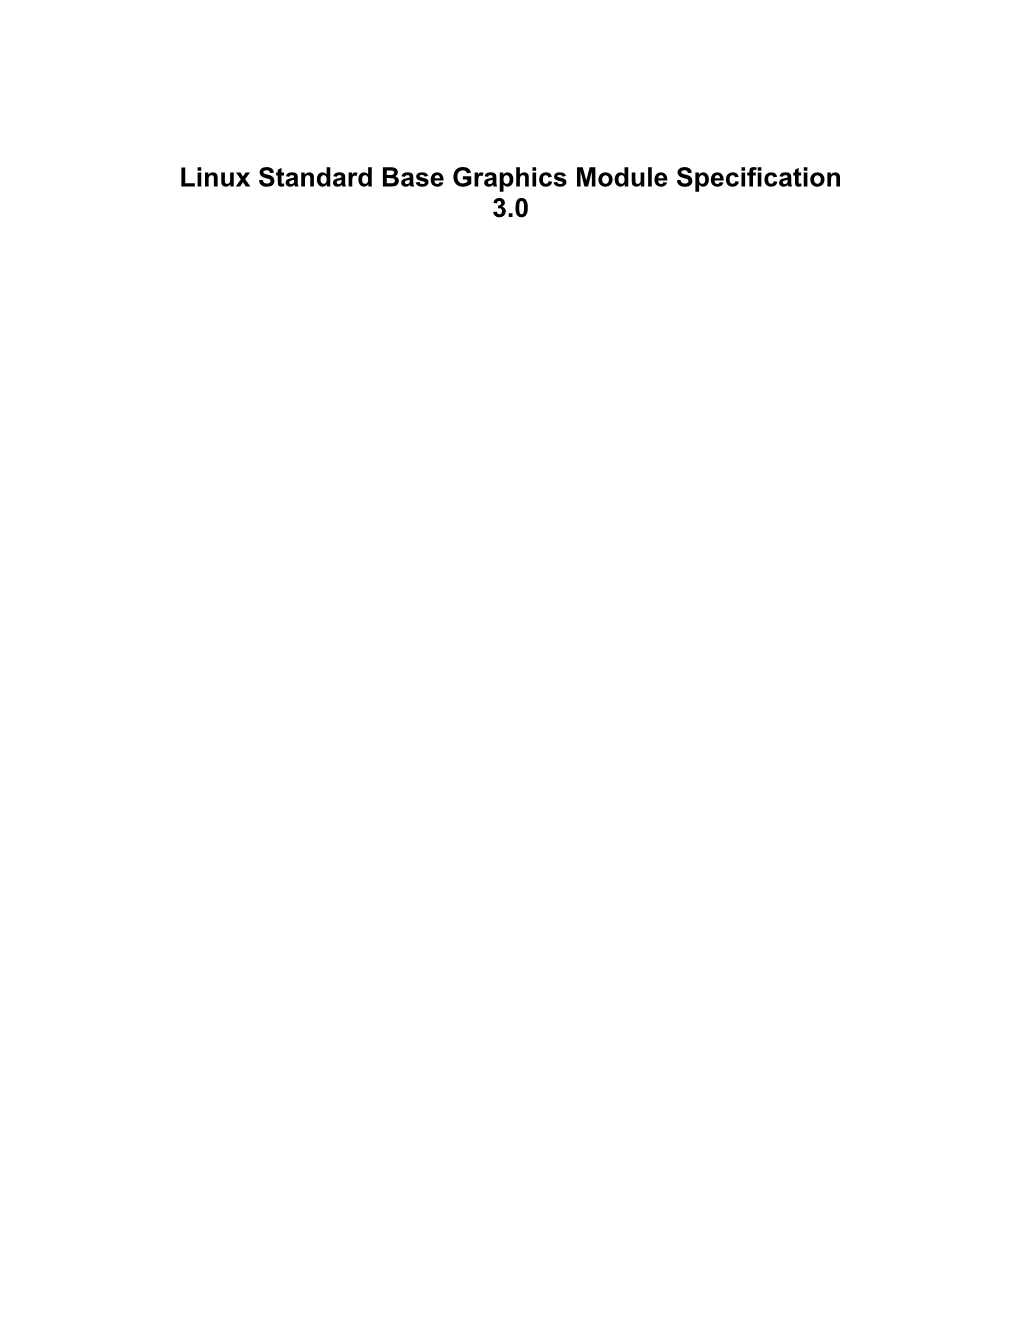 Linux Standard Base Graphics Module Specification 3.0